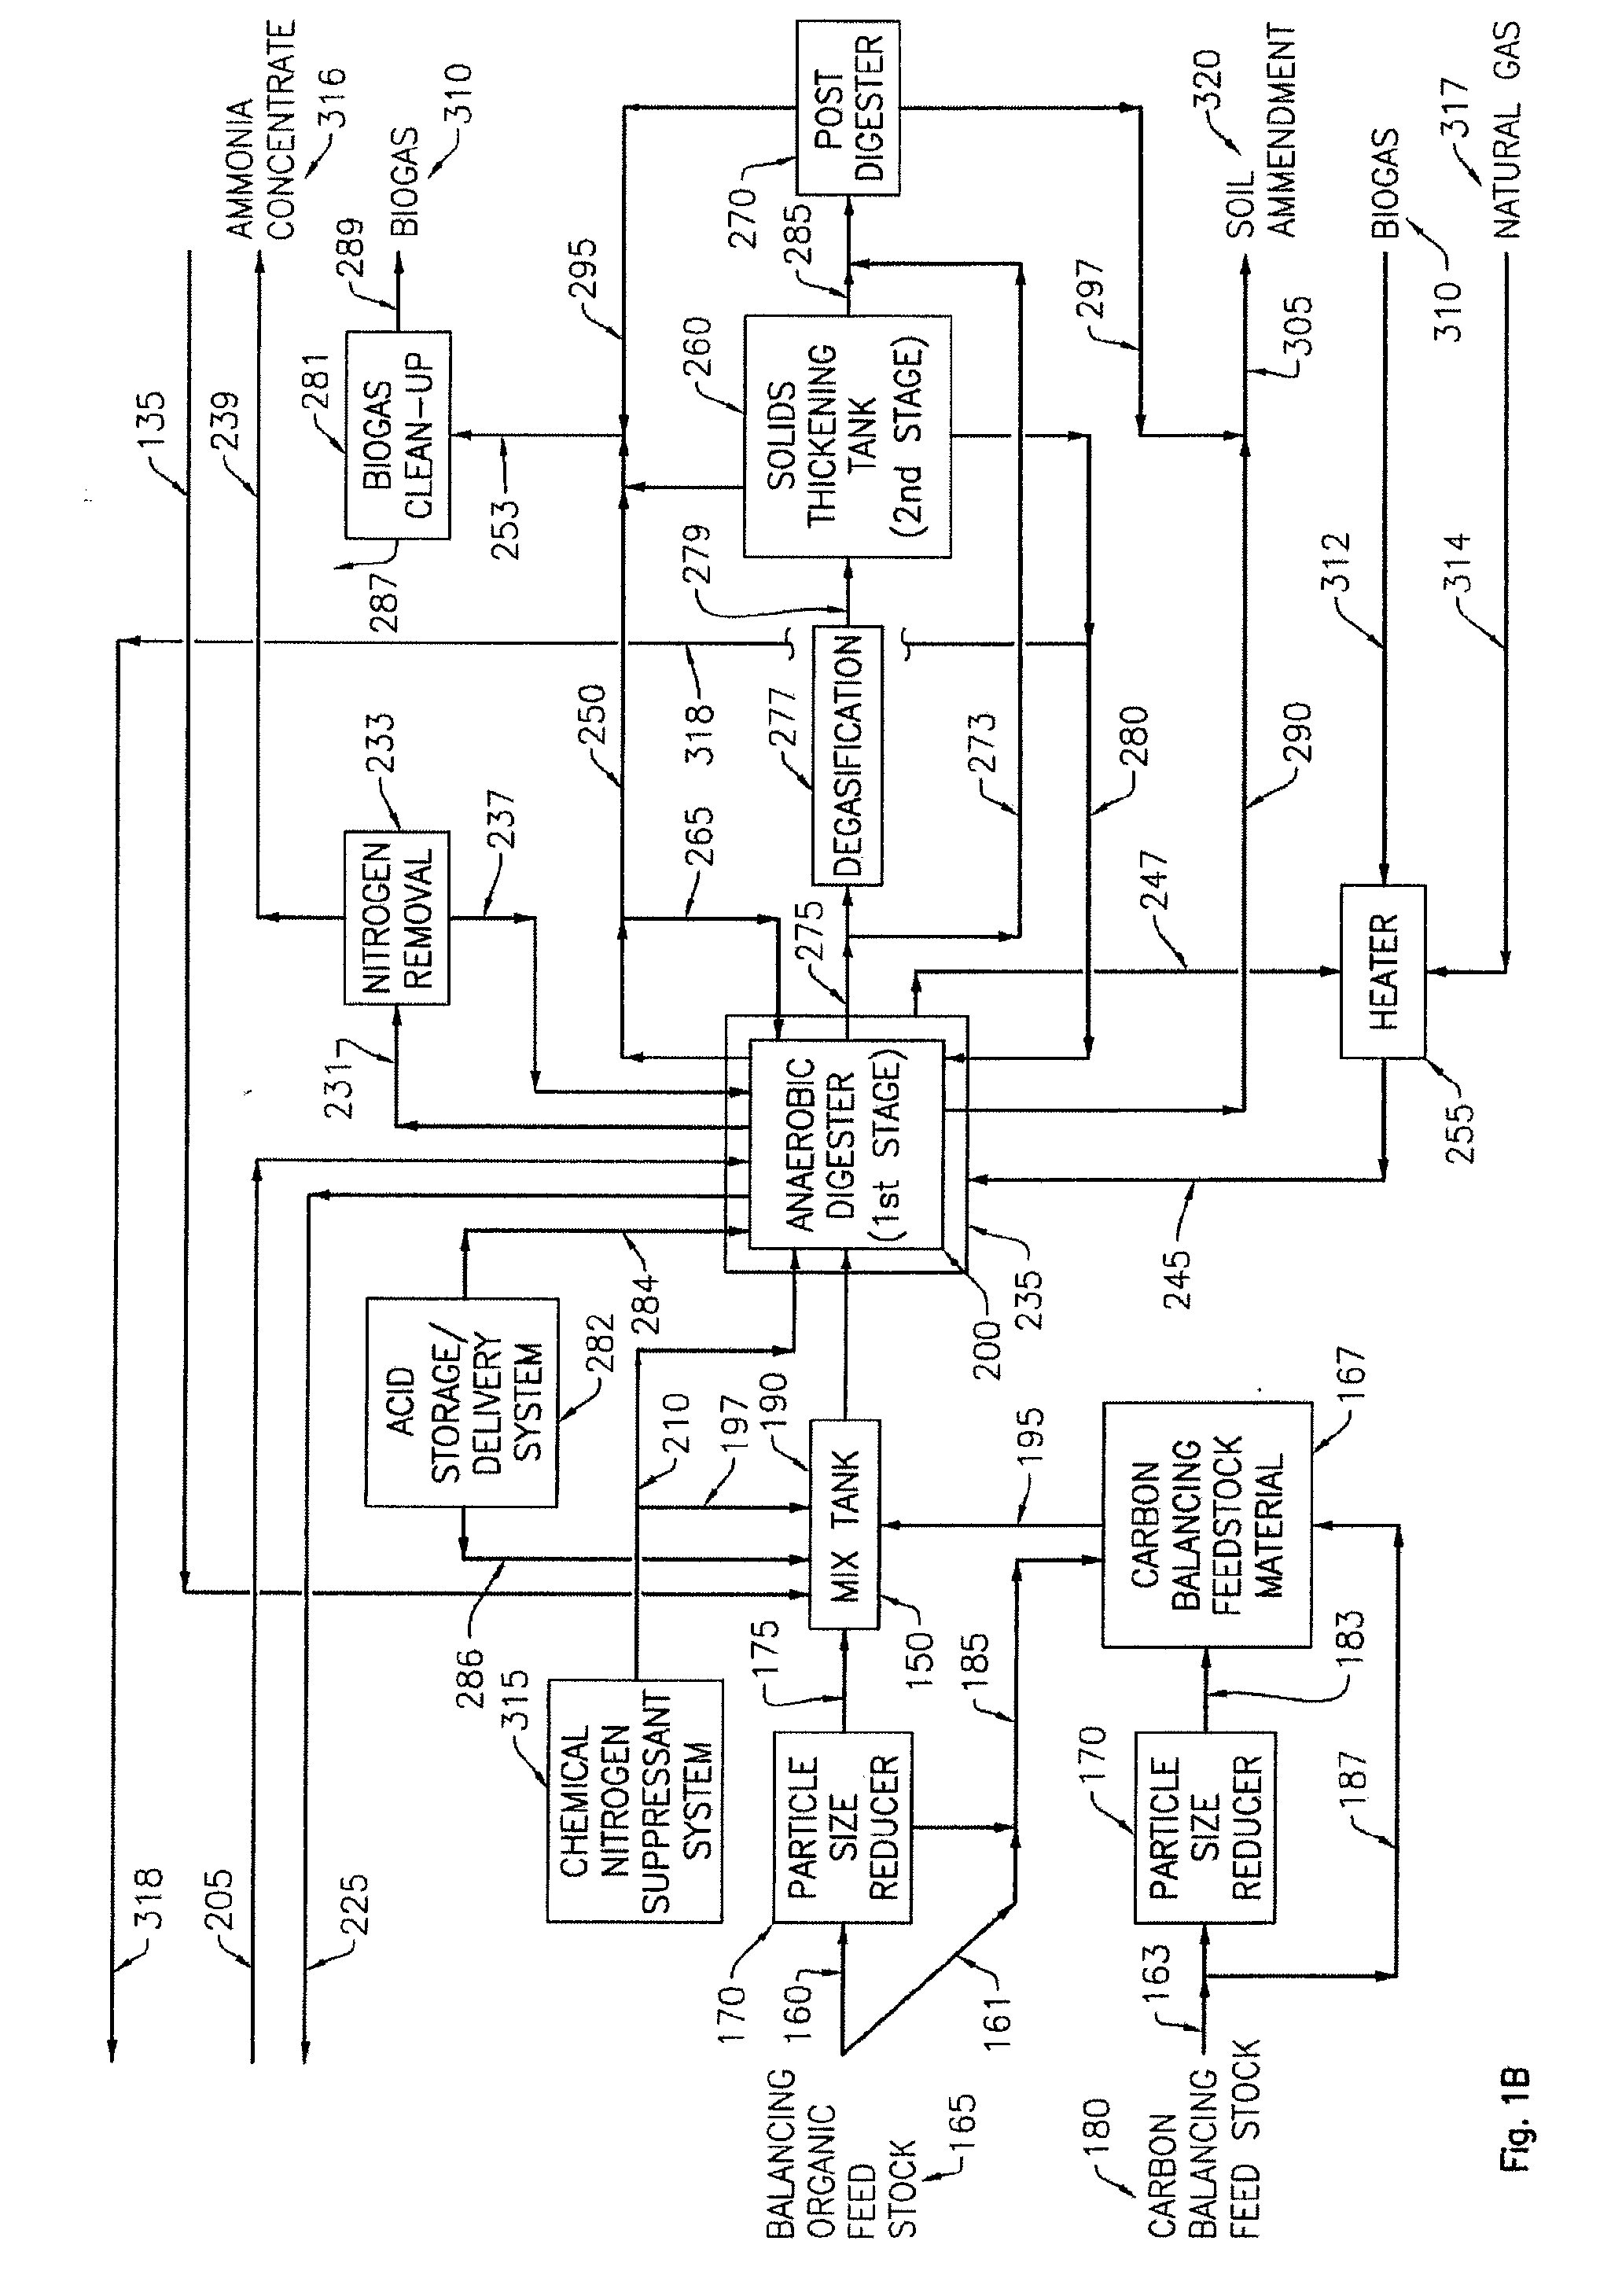 Apparatus and Process for Production of Biogas